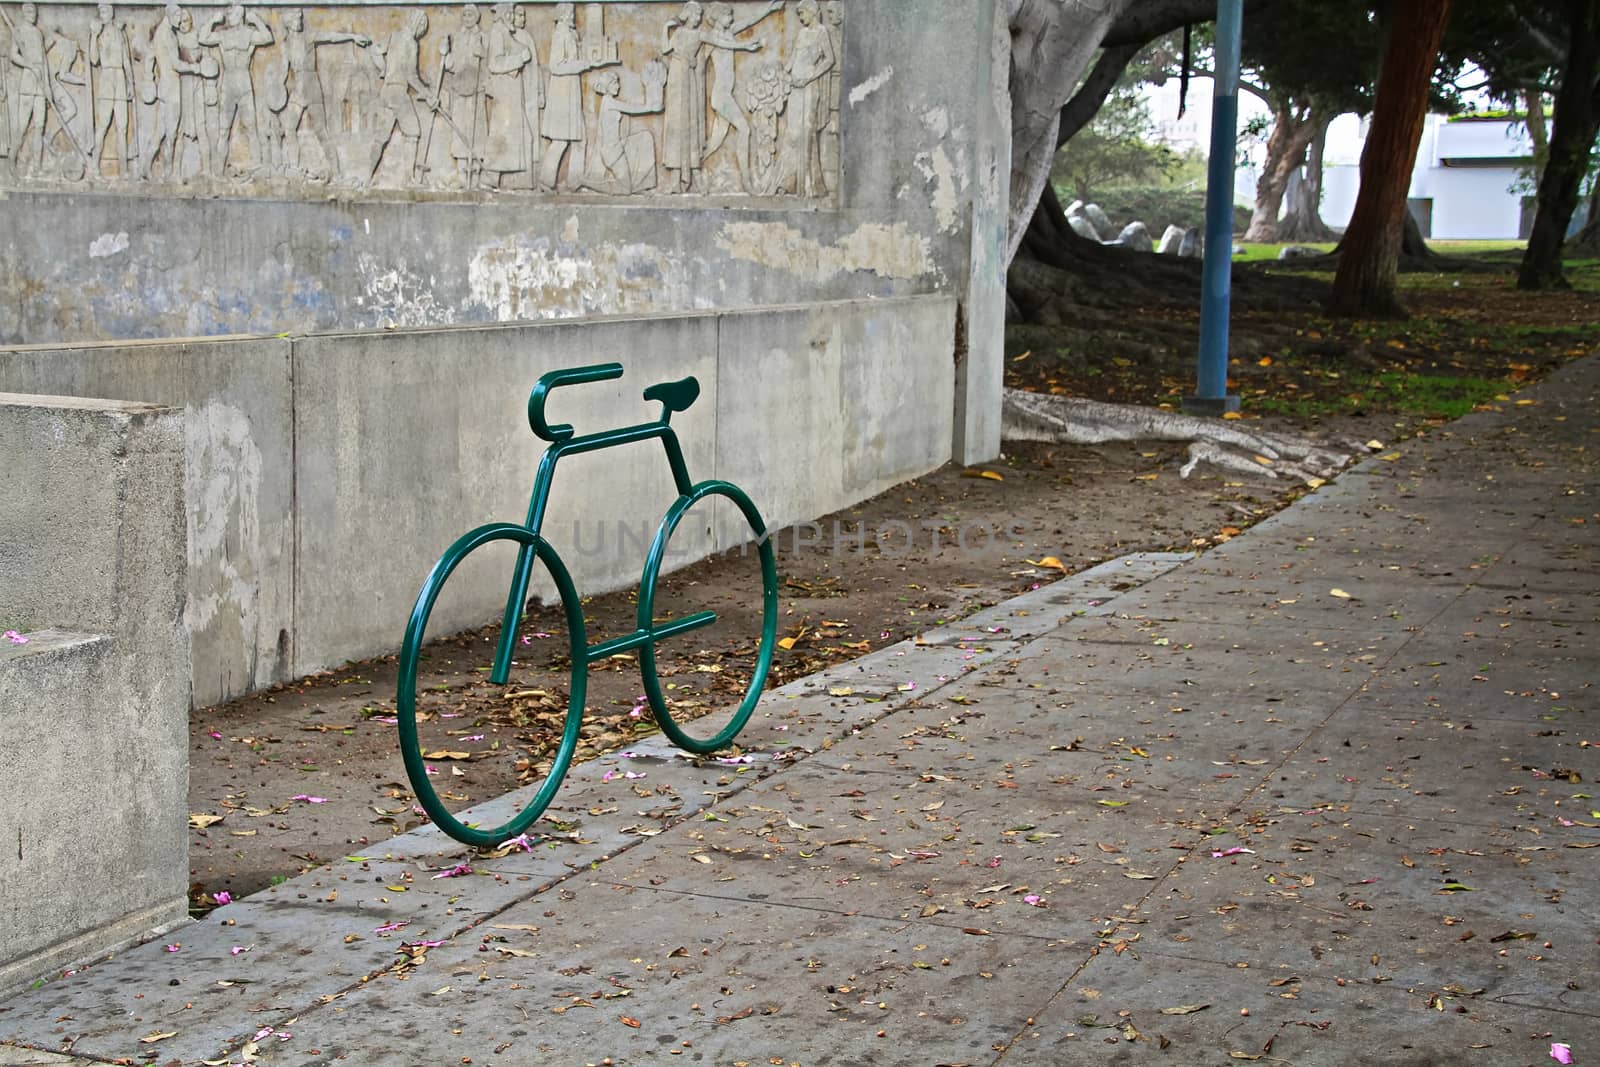 A bike parking opportunity with a symbol.bike parking Bicycle racks in bicycle parking facility Modern bike storage in the form of a steel spiral Bicycle parking. by USA-TARO